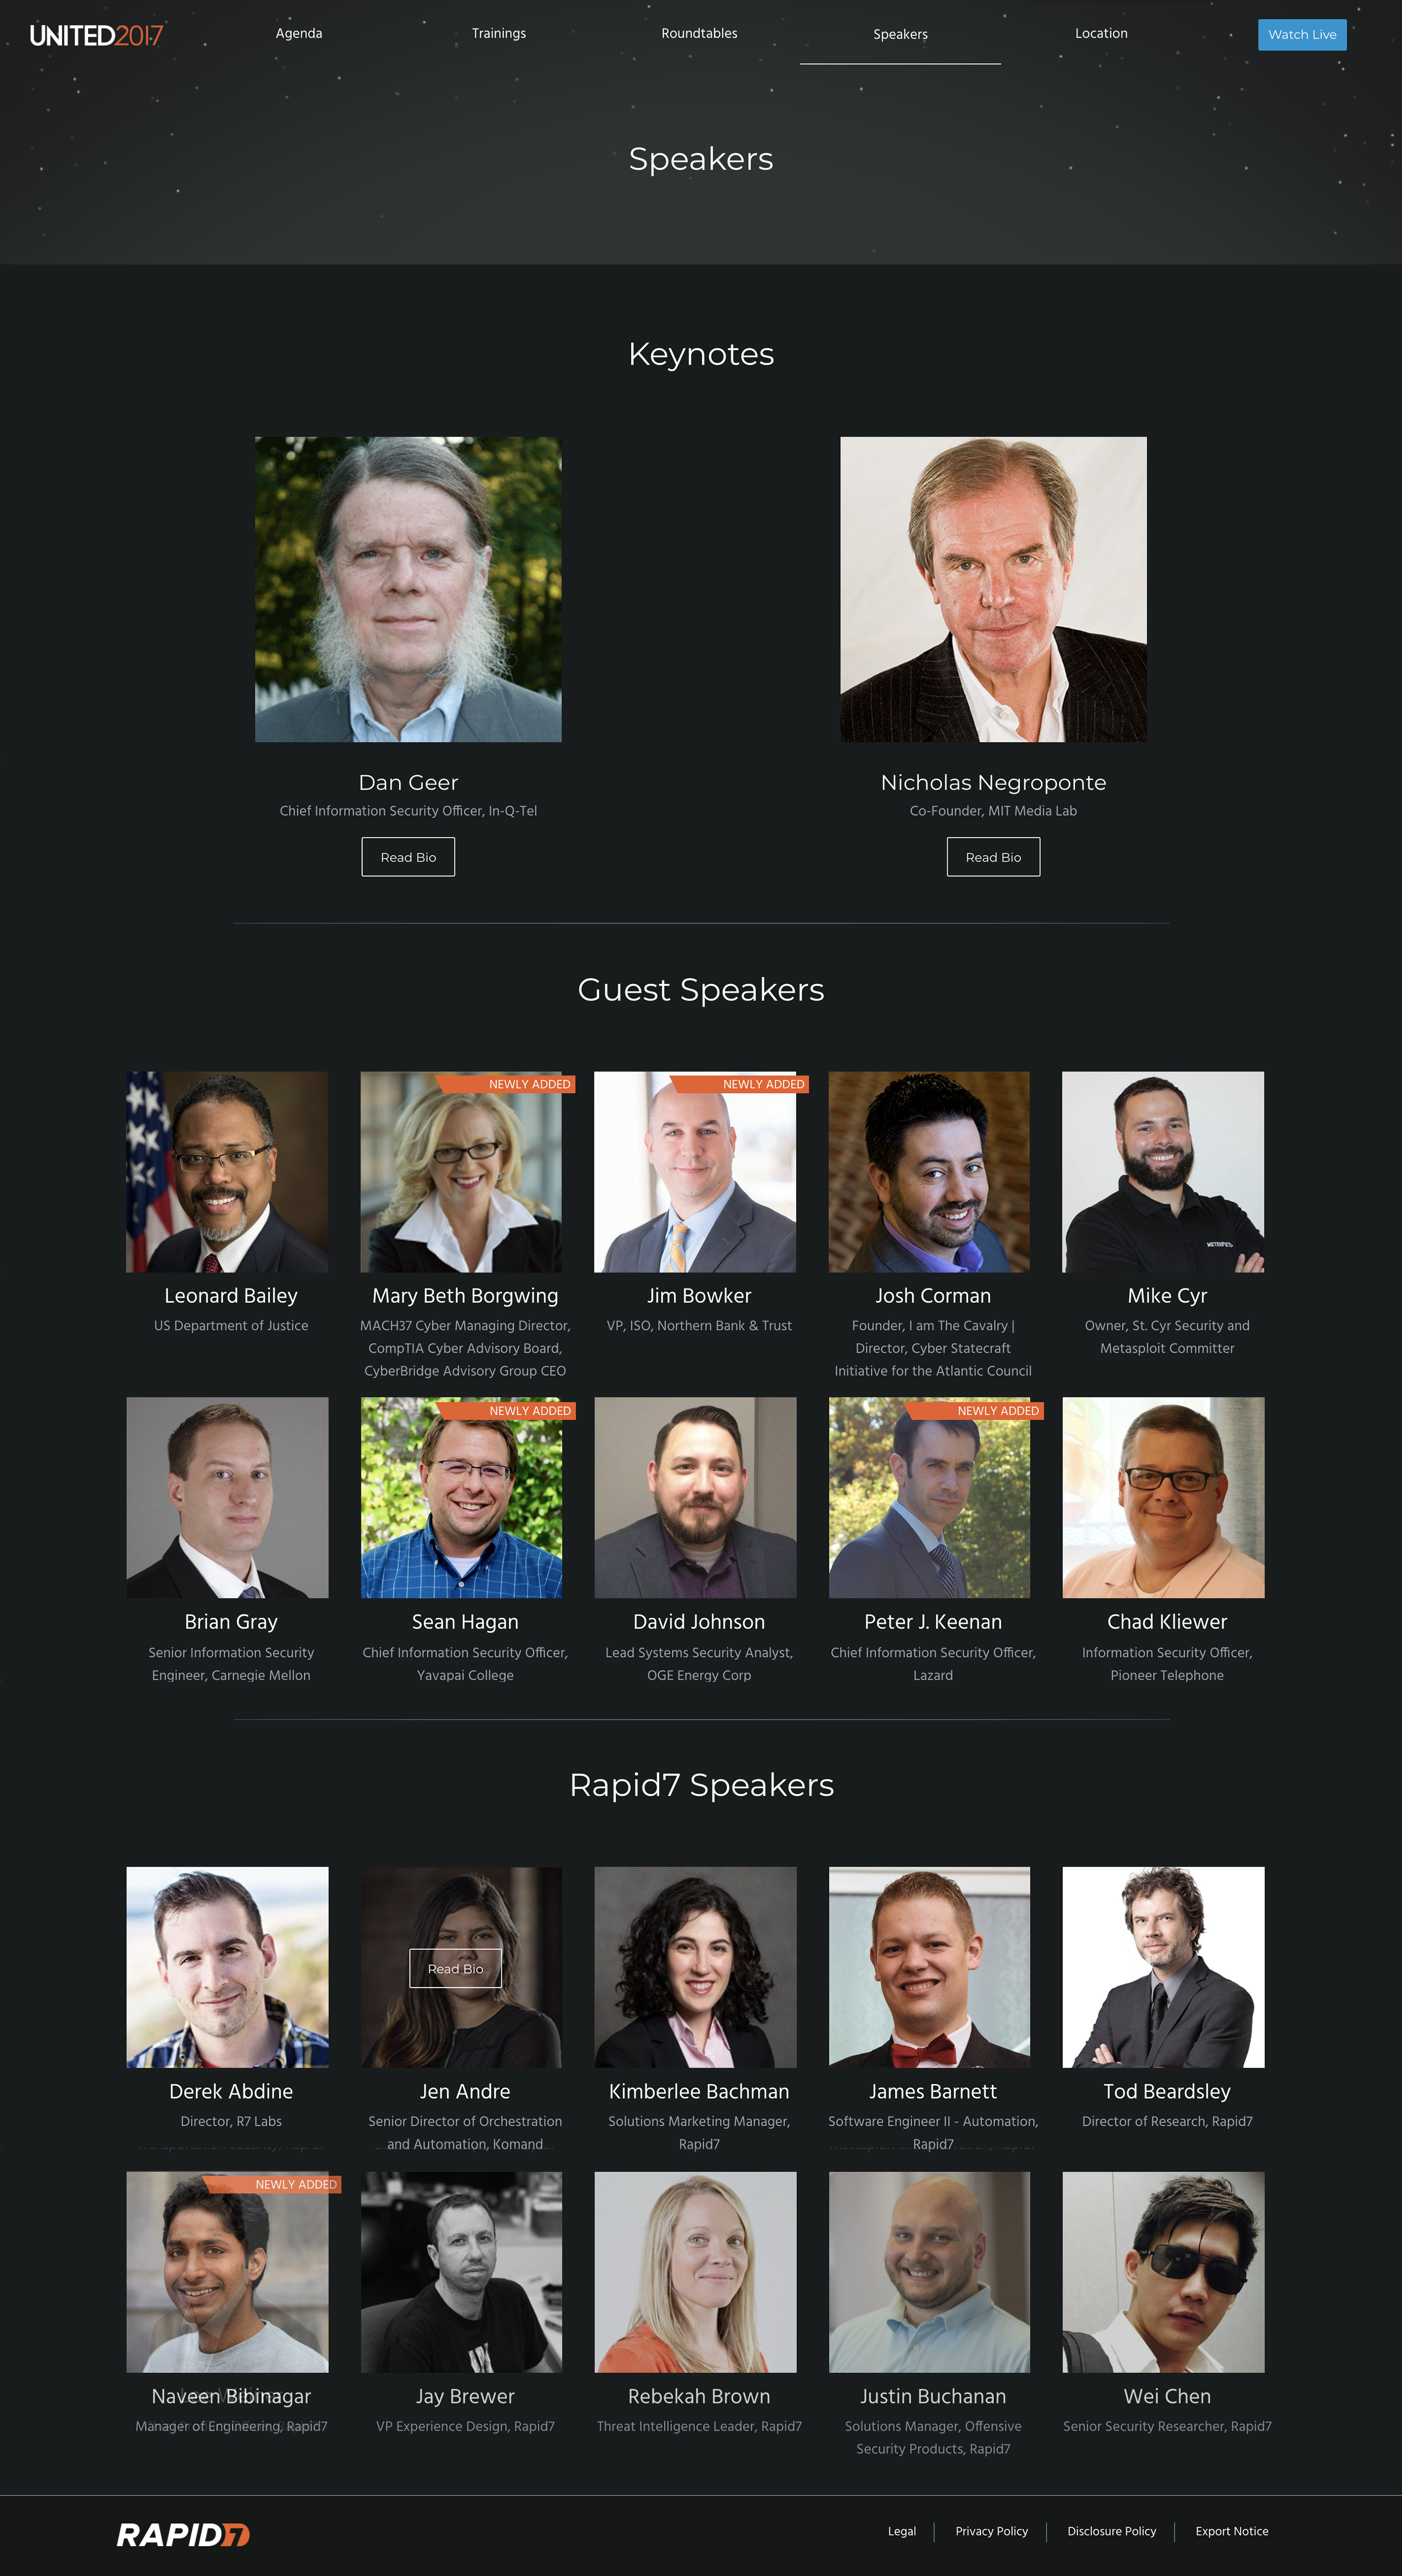 An organized list of keynote and guest speaker portraits and names